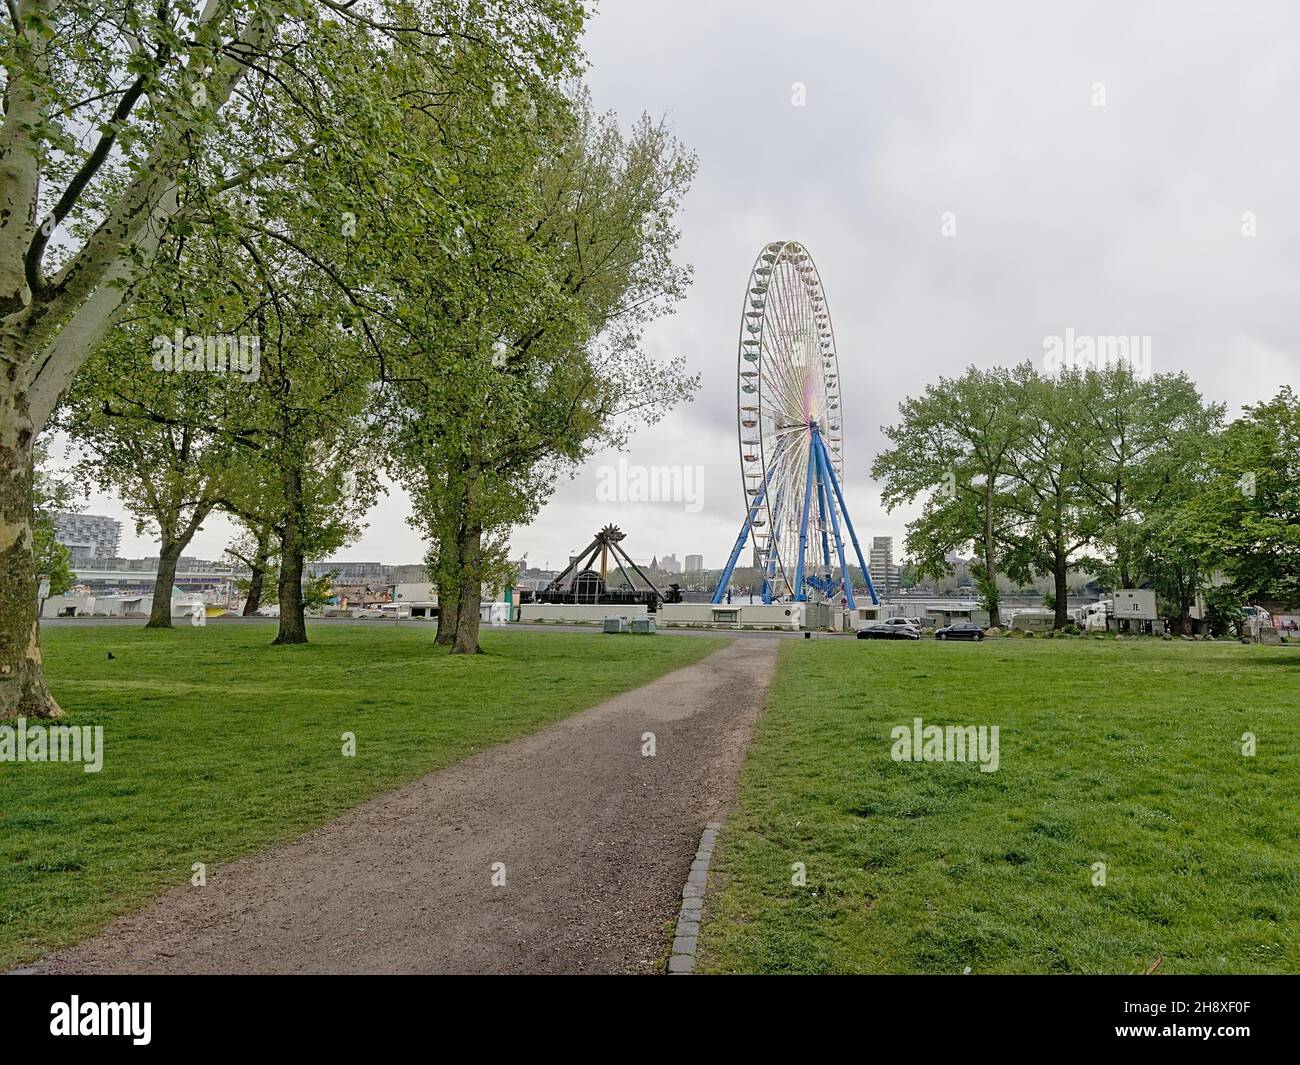 Ferris wheel in a park in Cologne, Germany Stock Photo